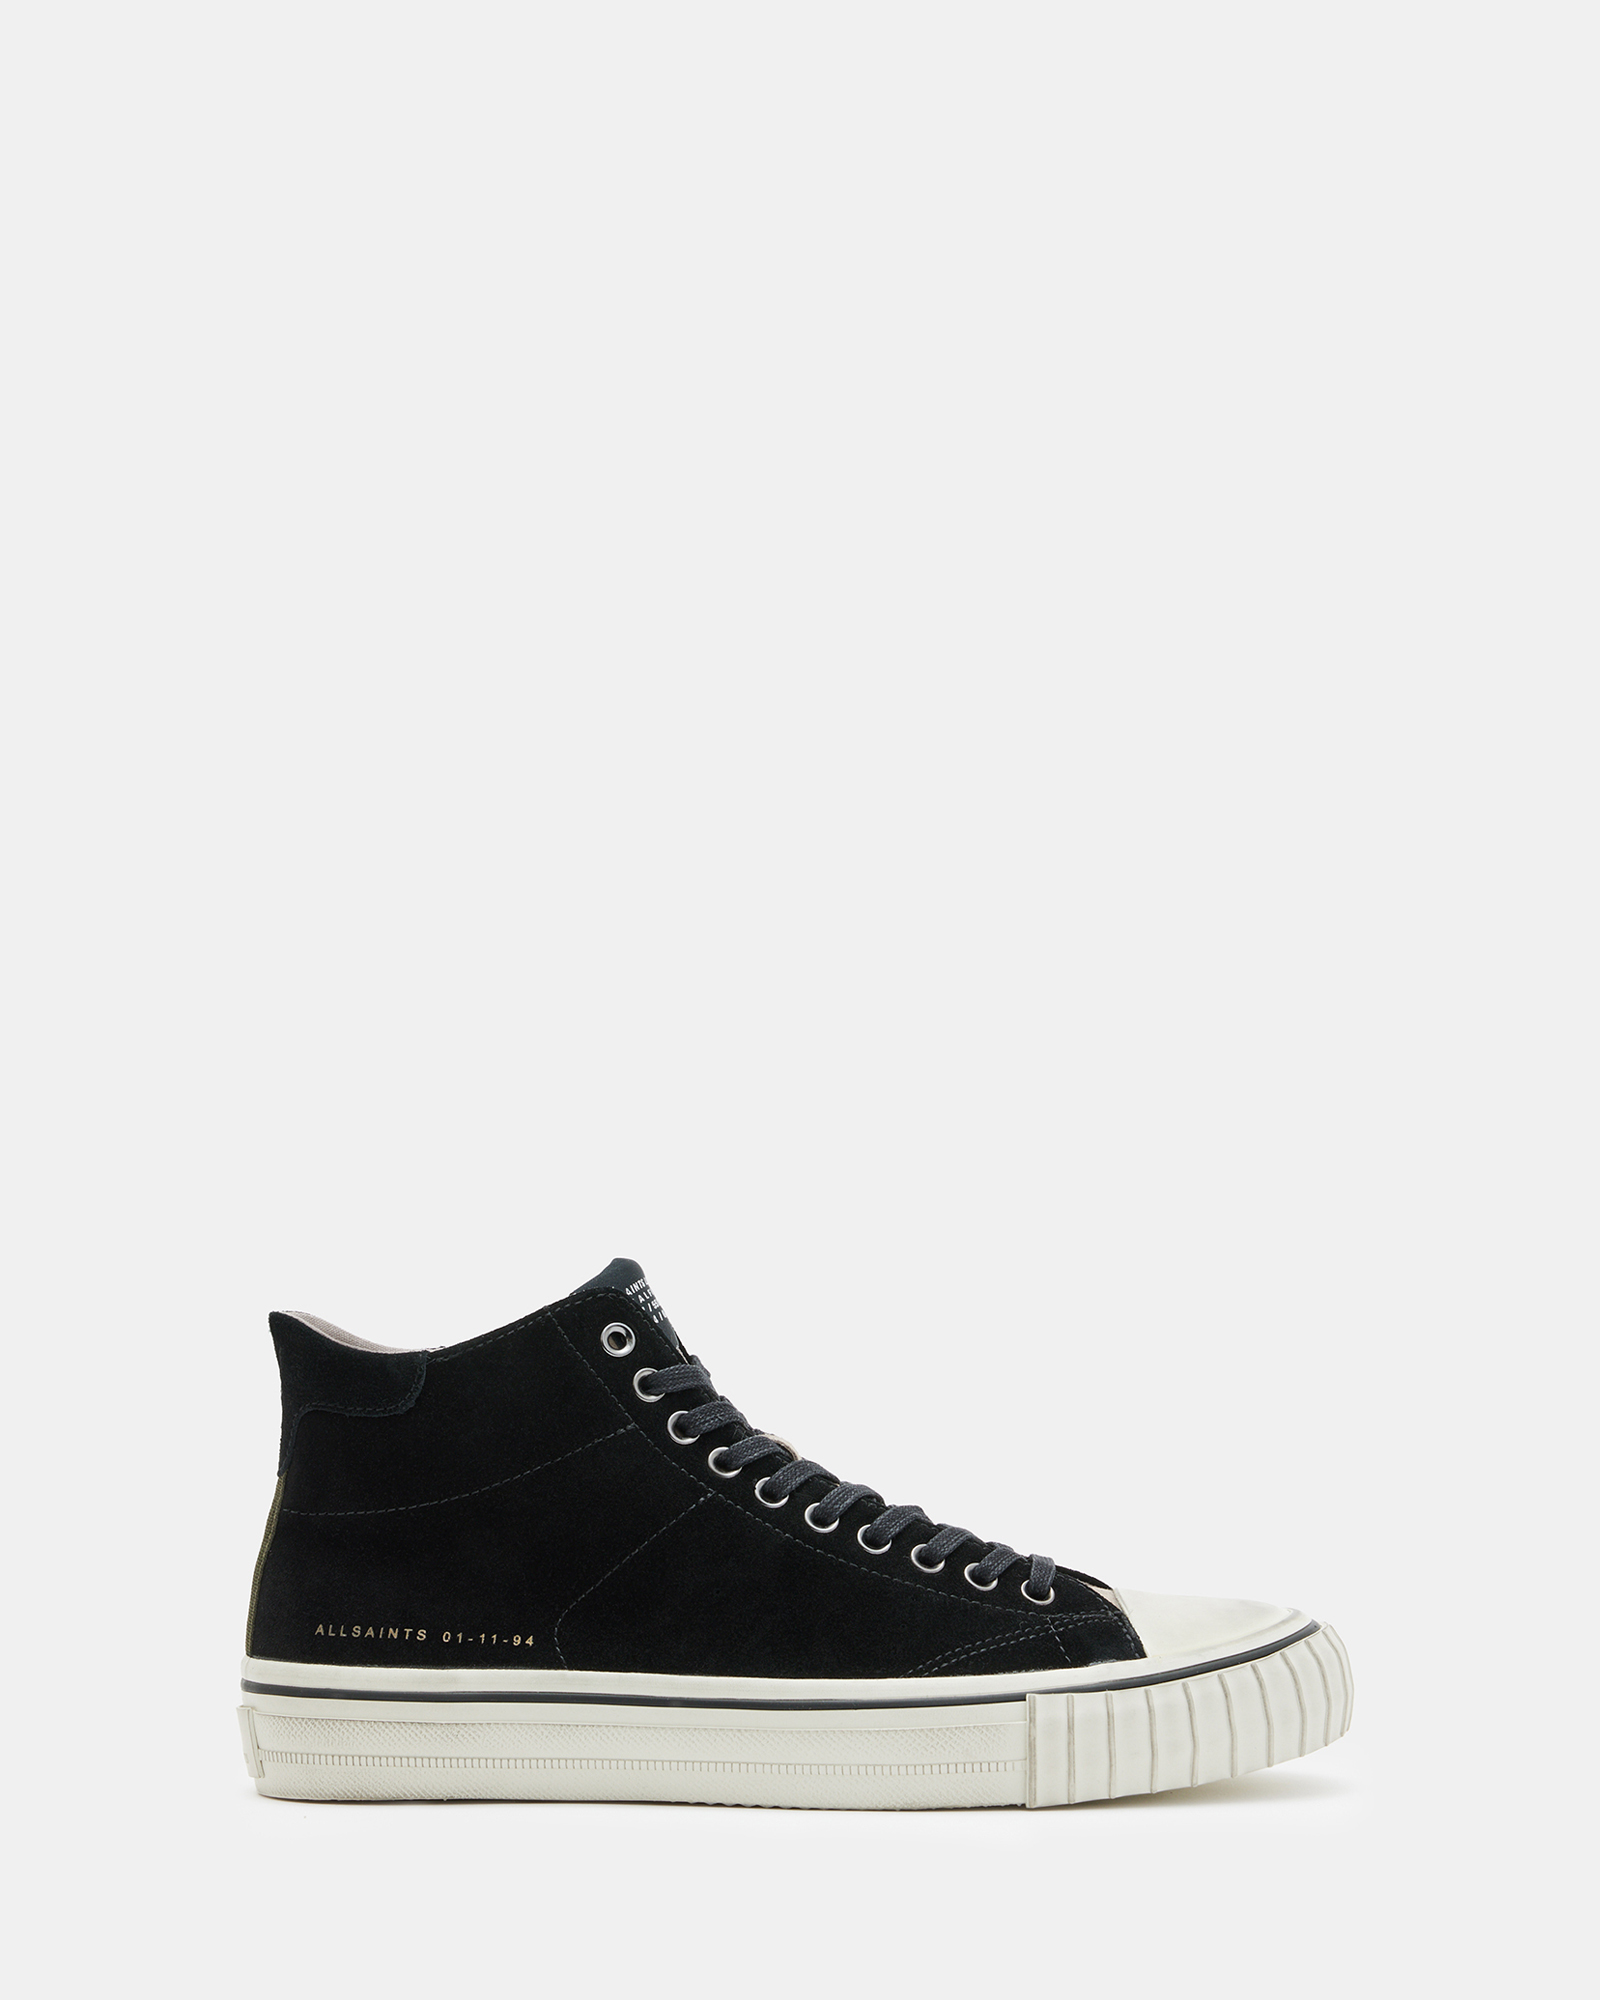 AllSaints Lewis Lace Up Suede High Top Trainers,, Black